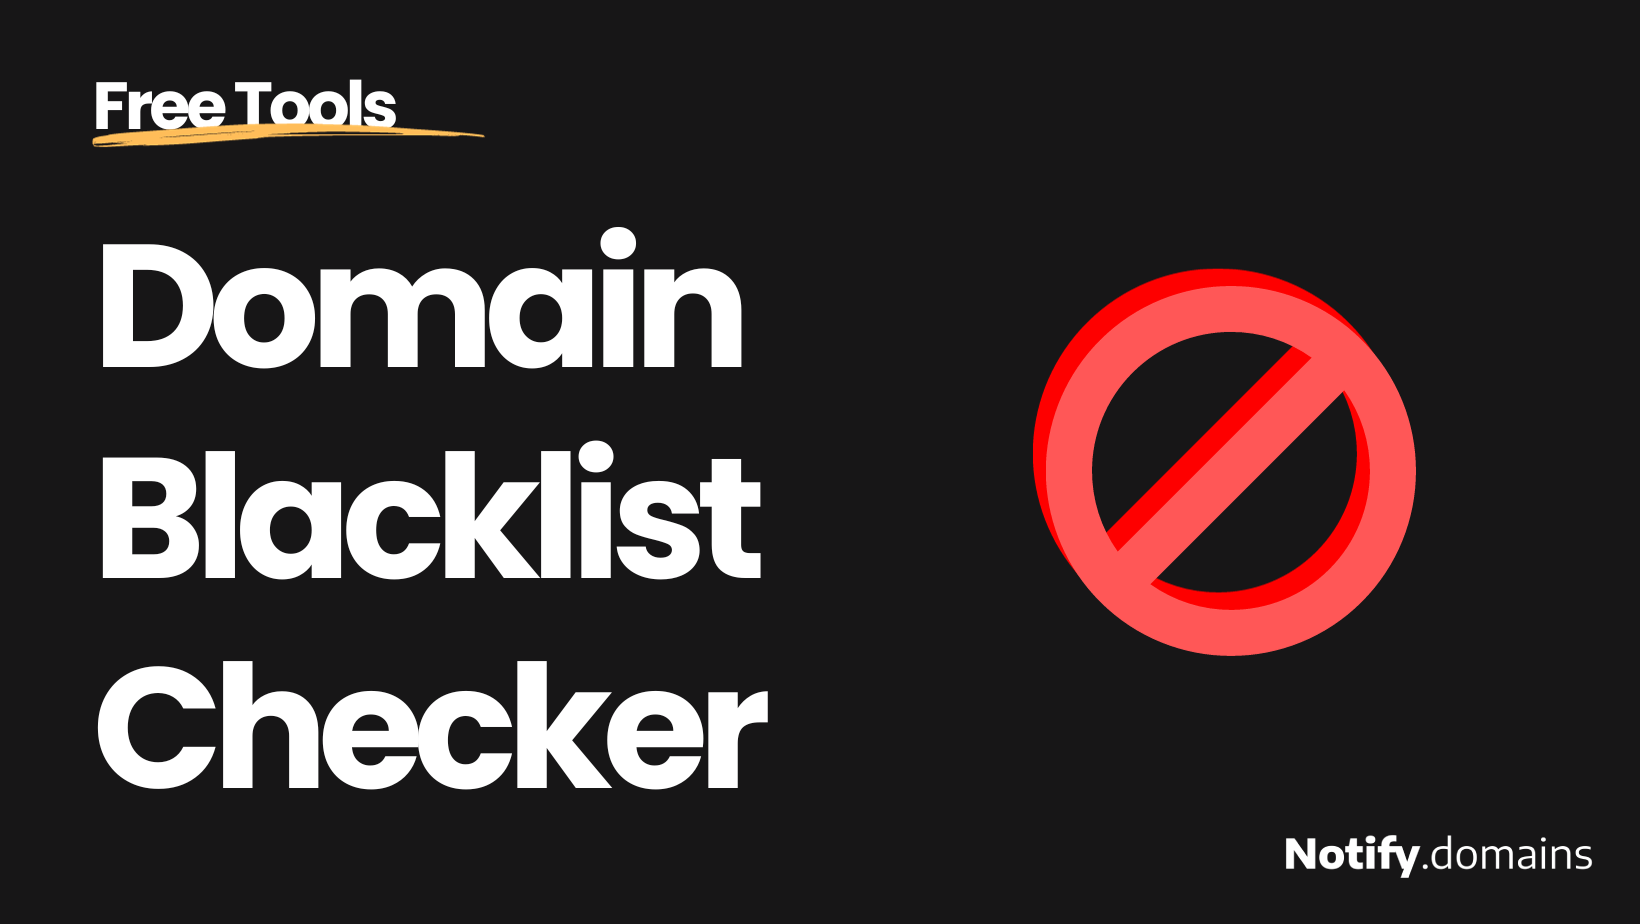 Introducing: Free blacklist checker for your domain!